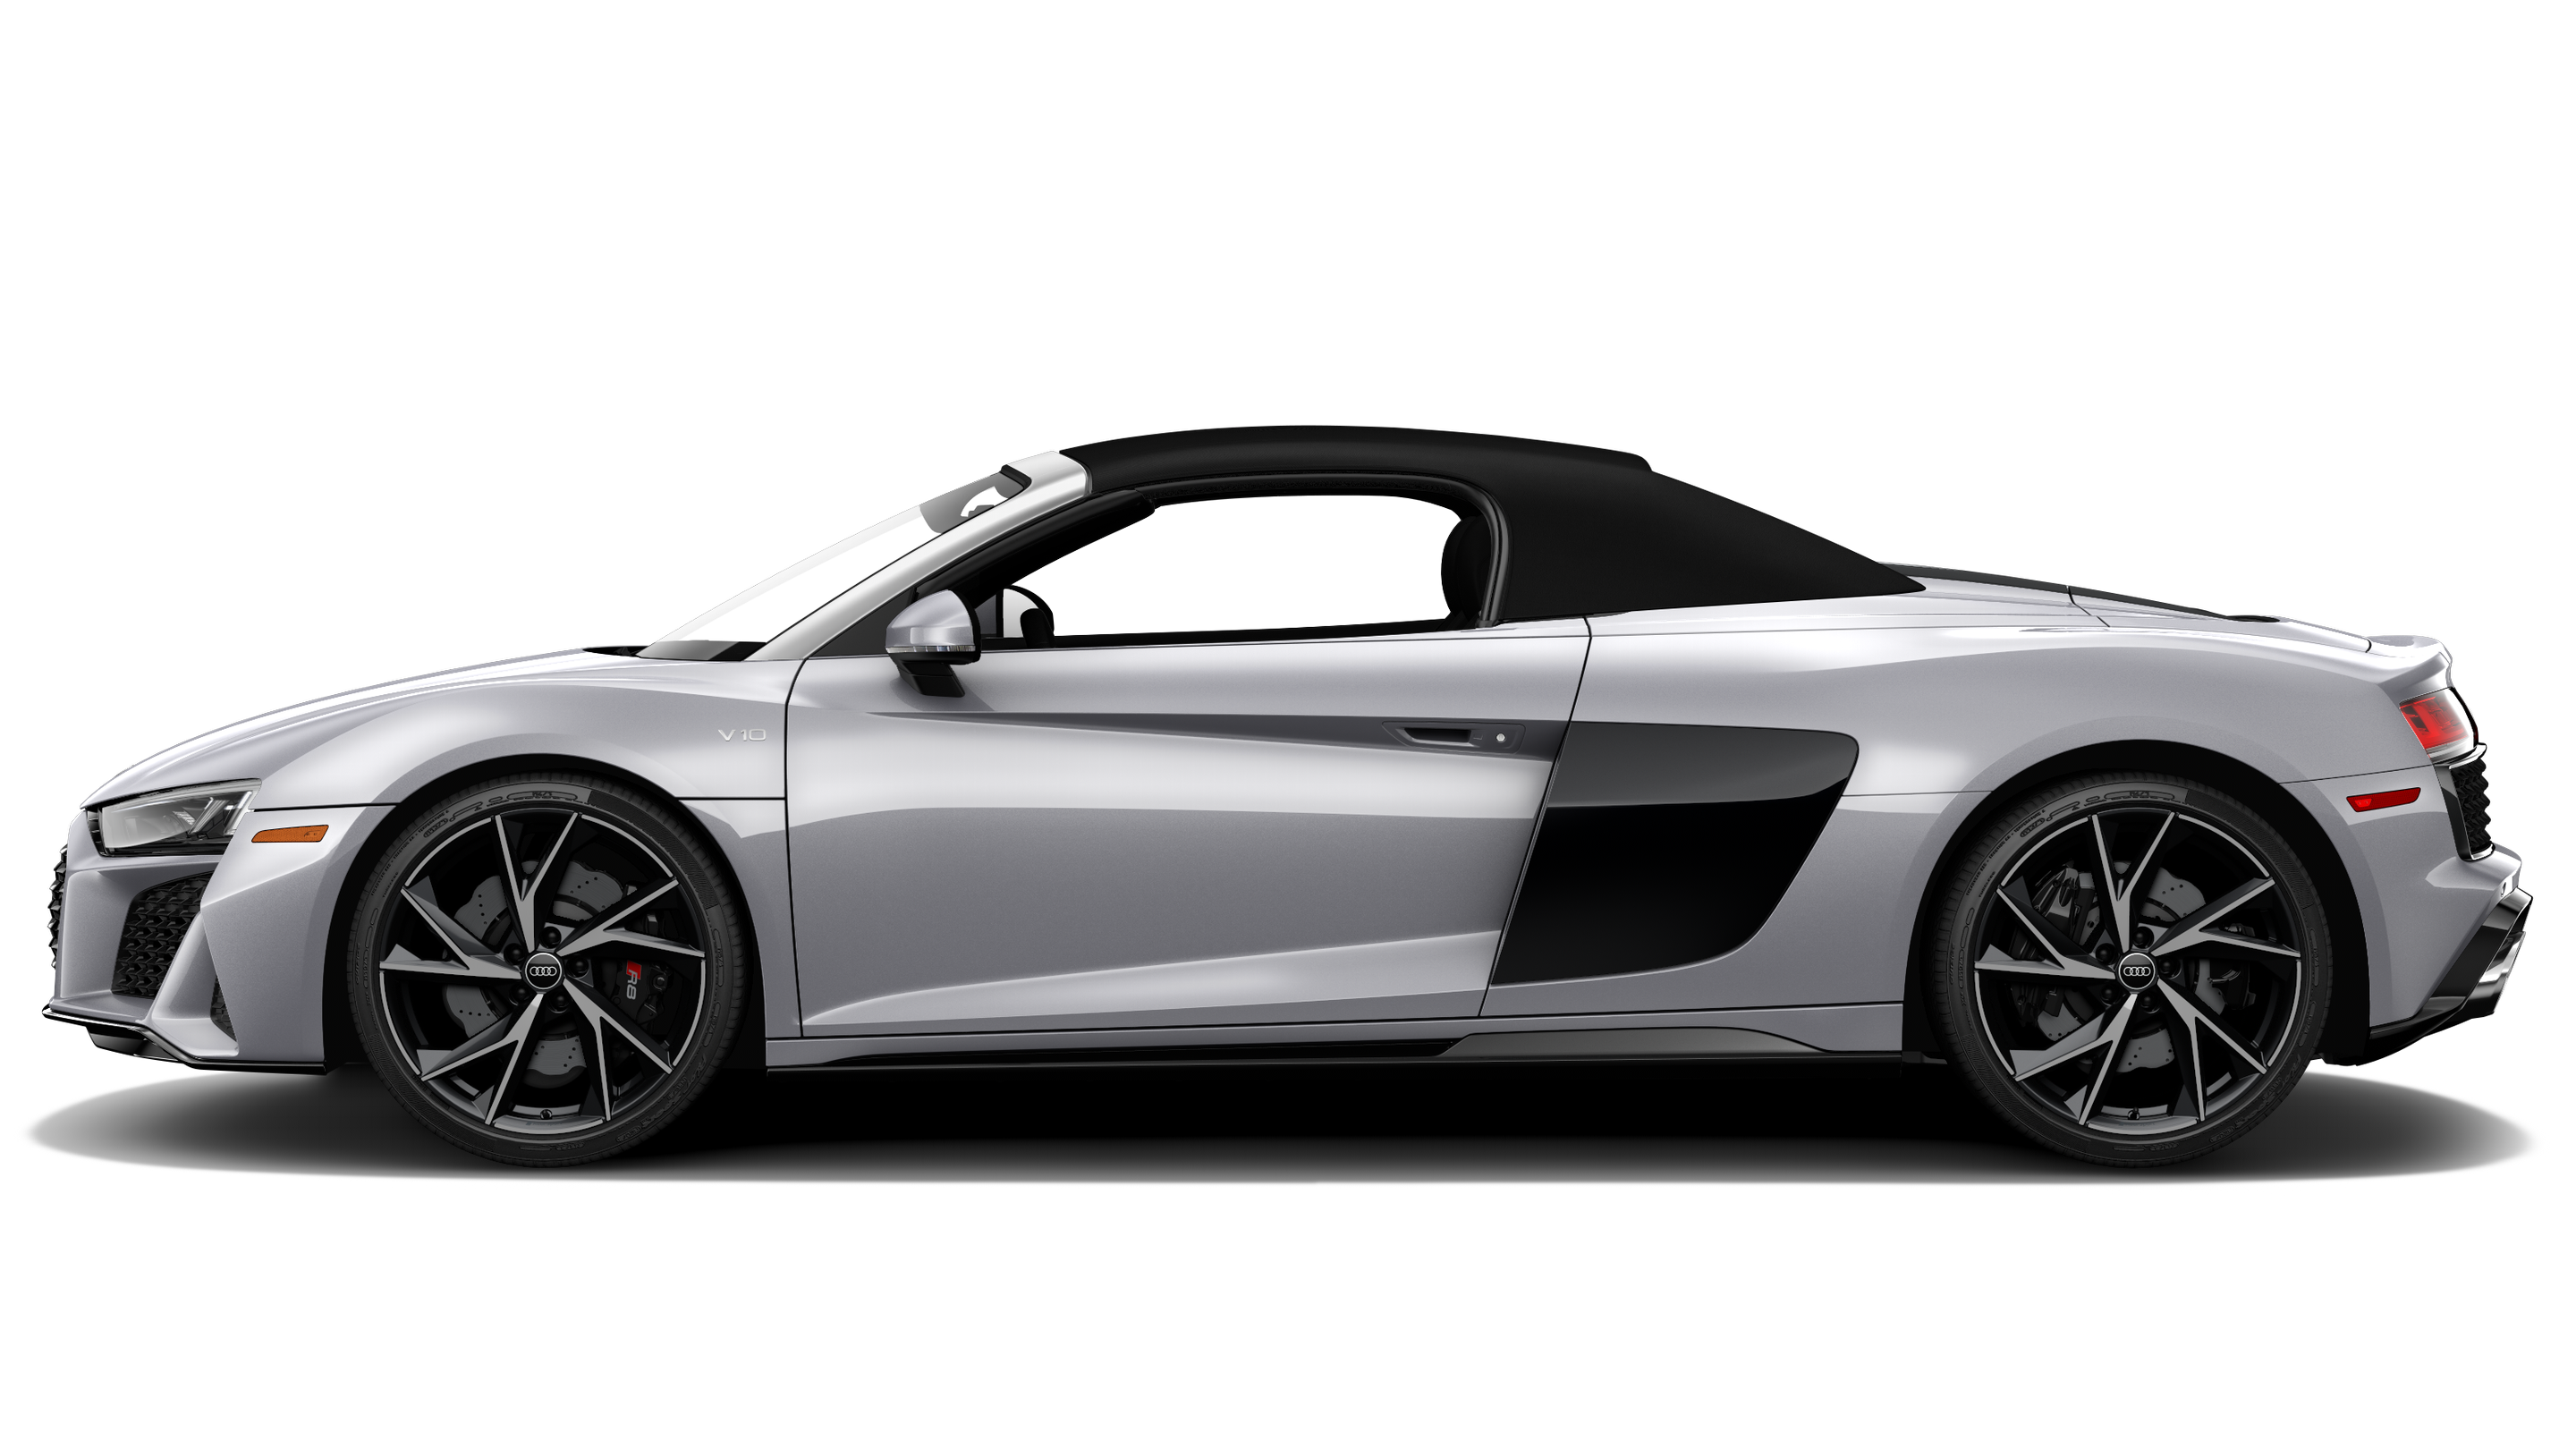 Build your own > 2023 R8 Spyder > 2023 > R8 Spyder [REDIRECT] > Audi |  Luxury sedans, SUVs, convertibles, electric vehicles & more